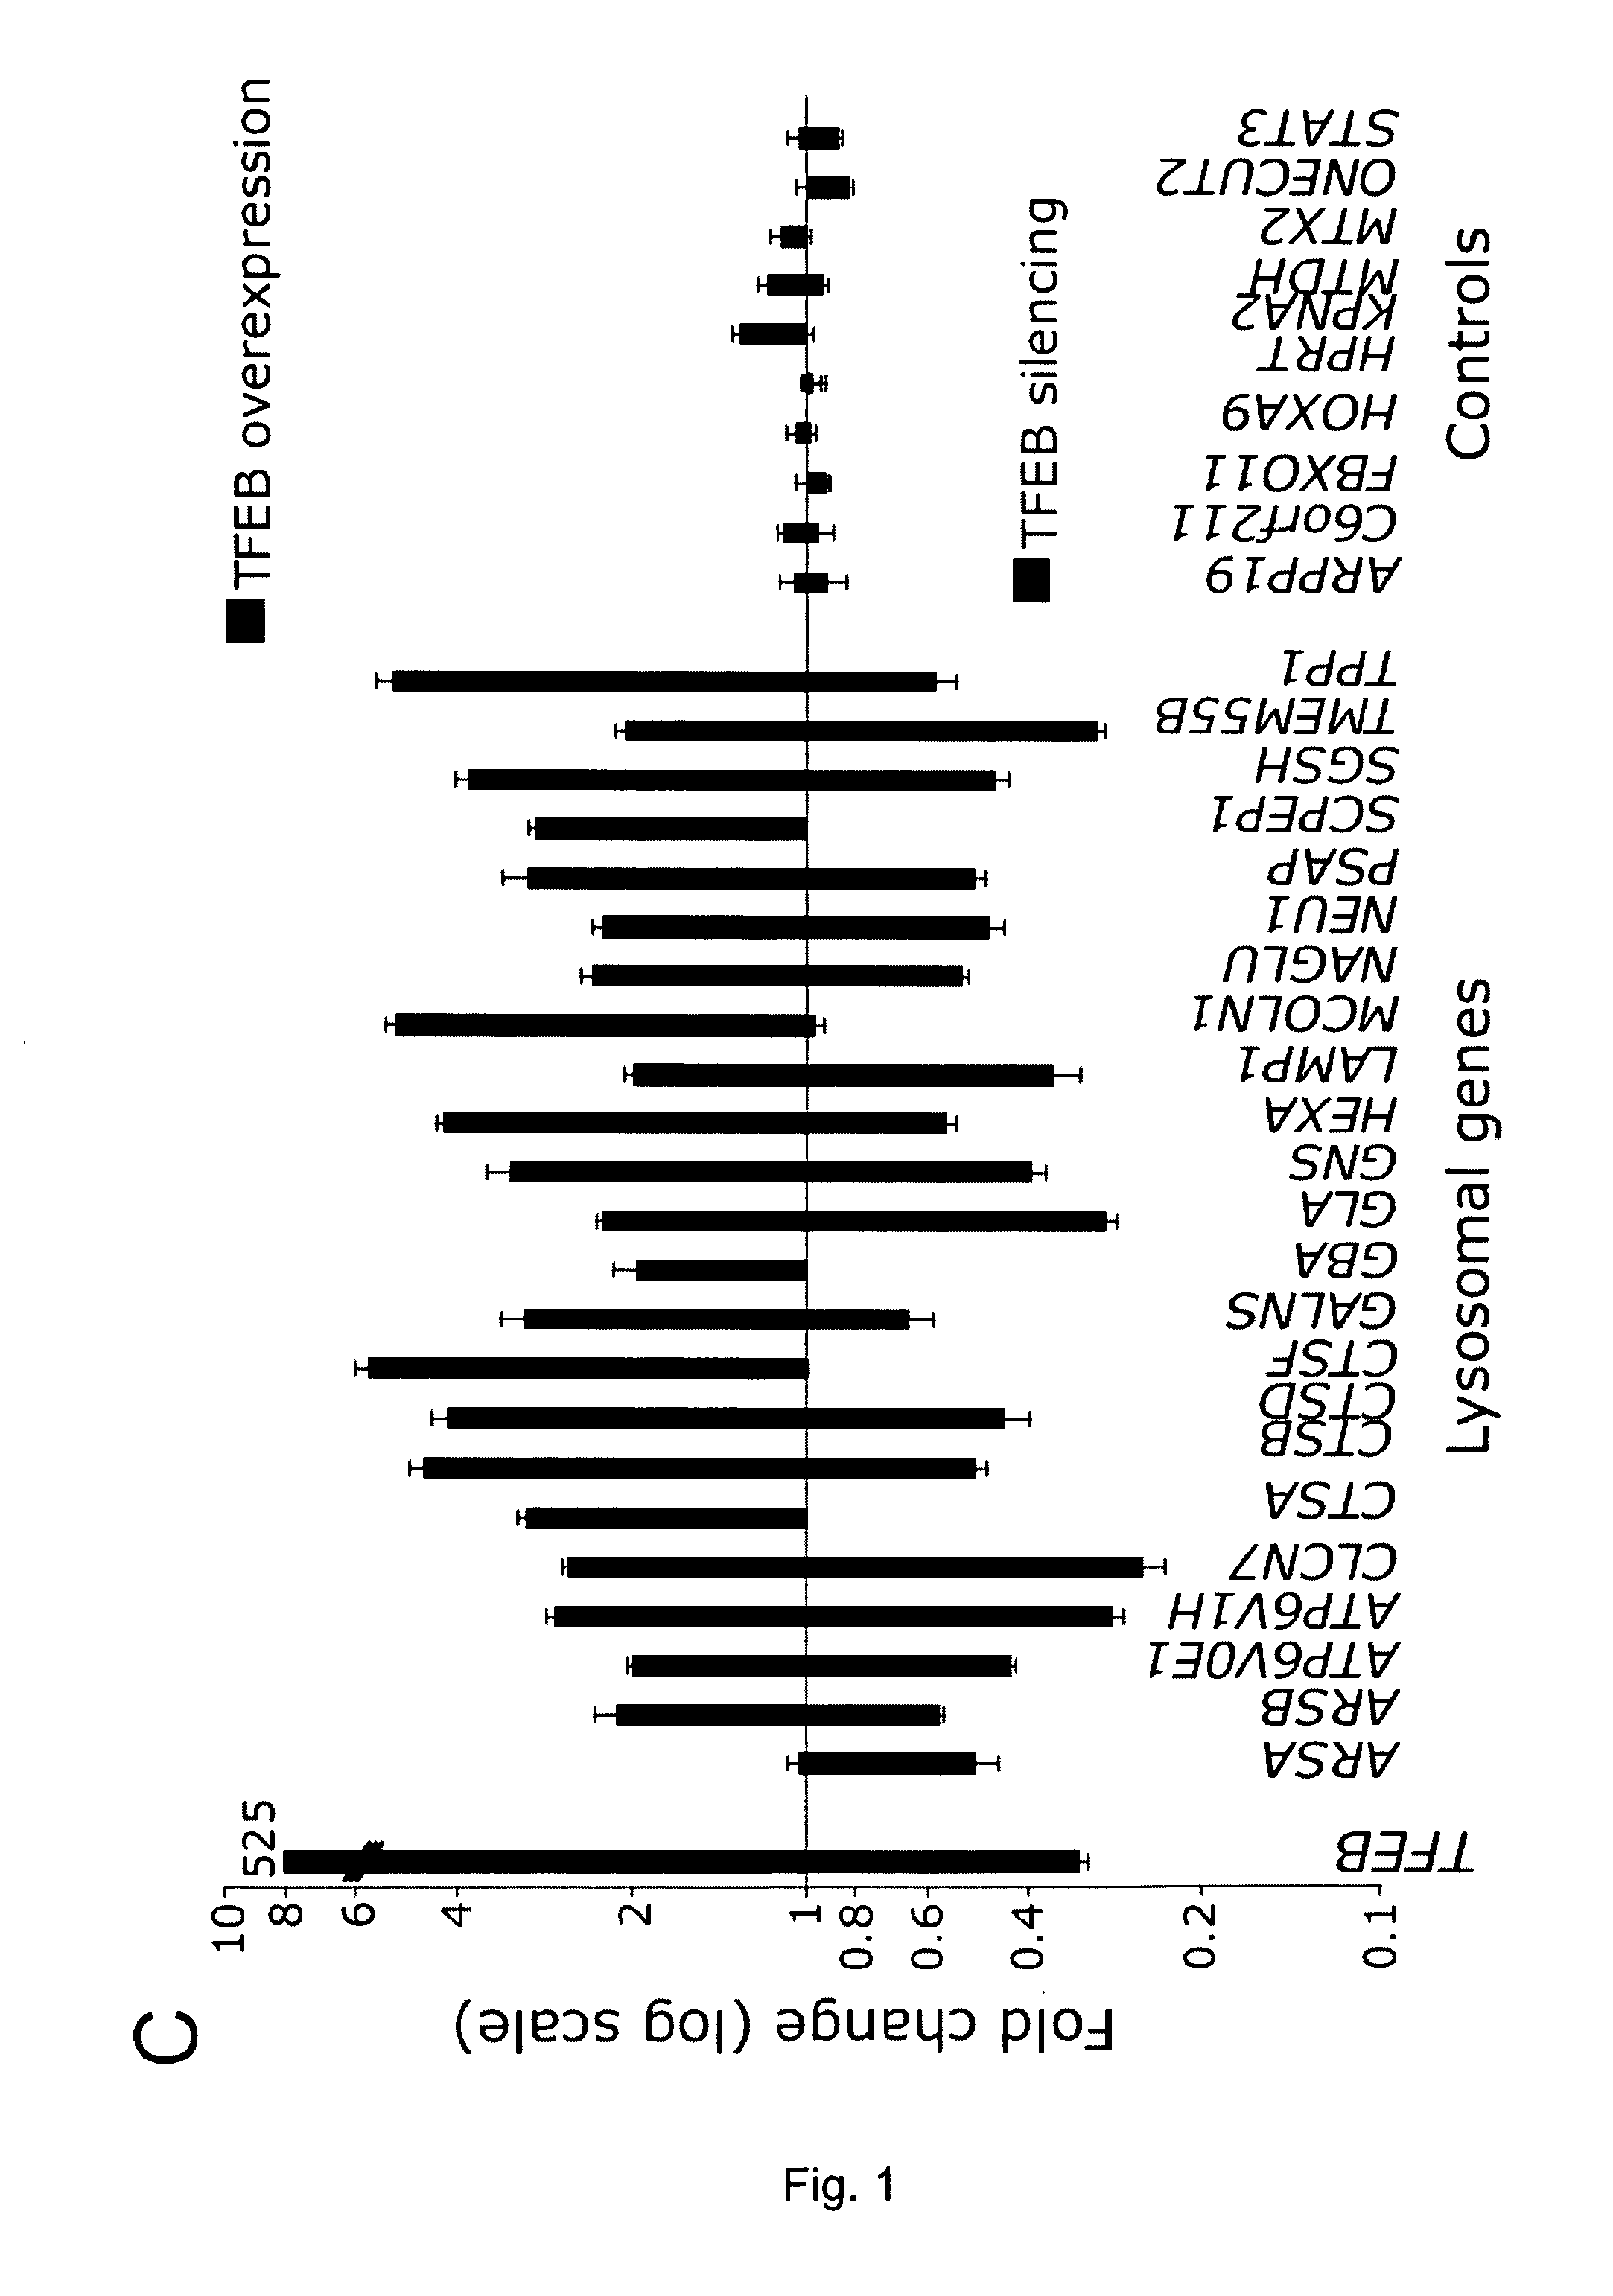 Molecules able to modulate the expression of at least a gene involved in degradative pathways and uses thereof